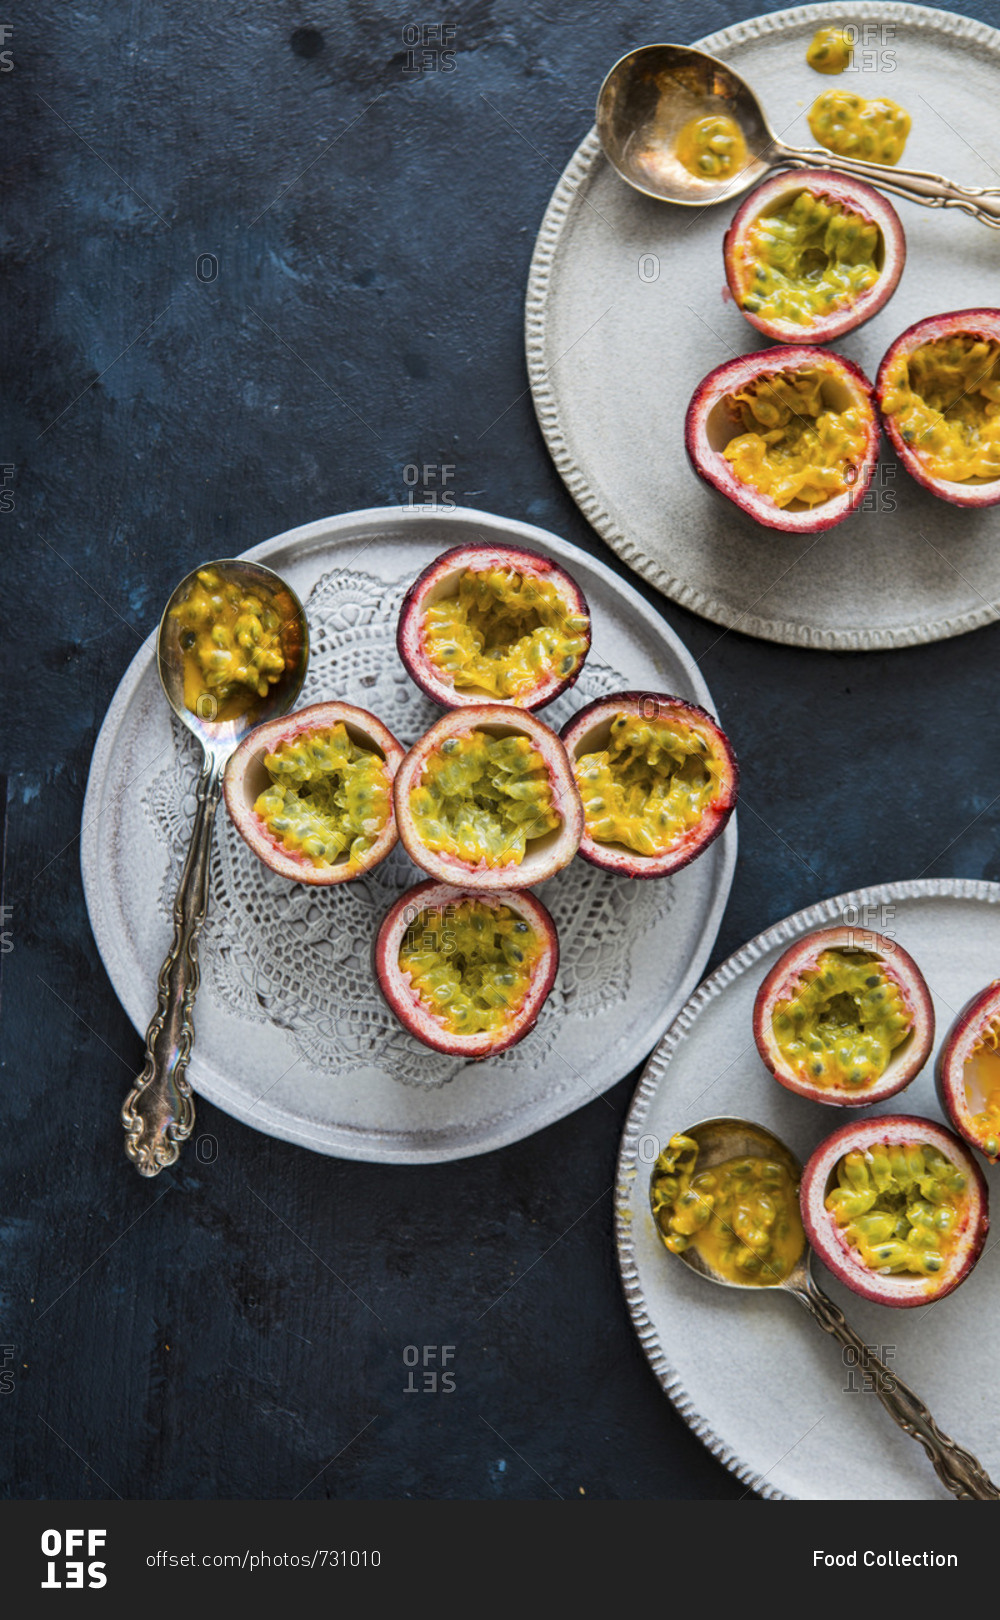 Passion fruit from the Offset Collection stock photo - OFFSET